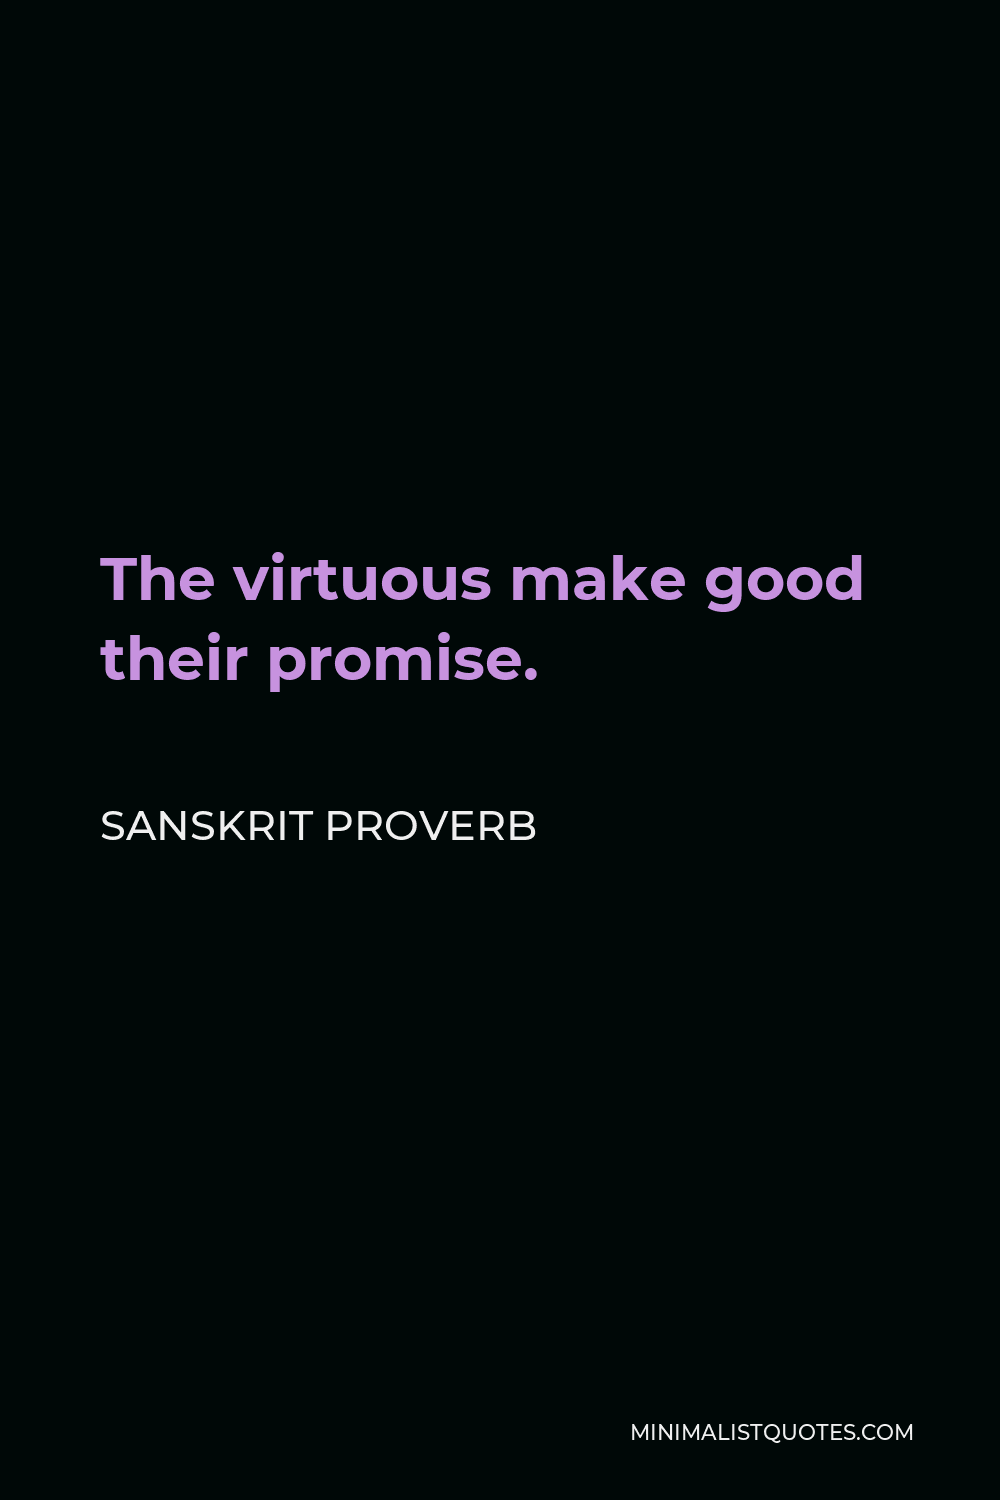 Sanskrit Proverb Quote - The virtuous make good their promise.